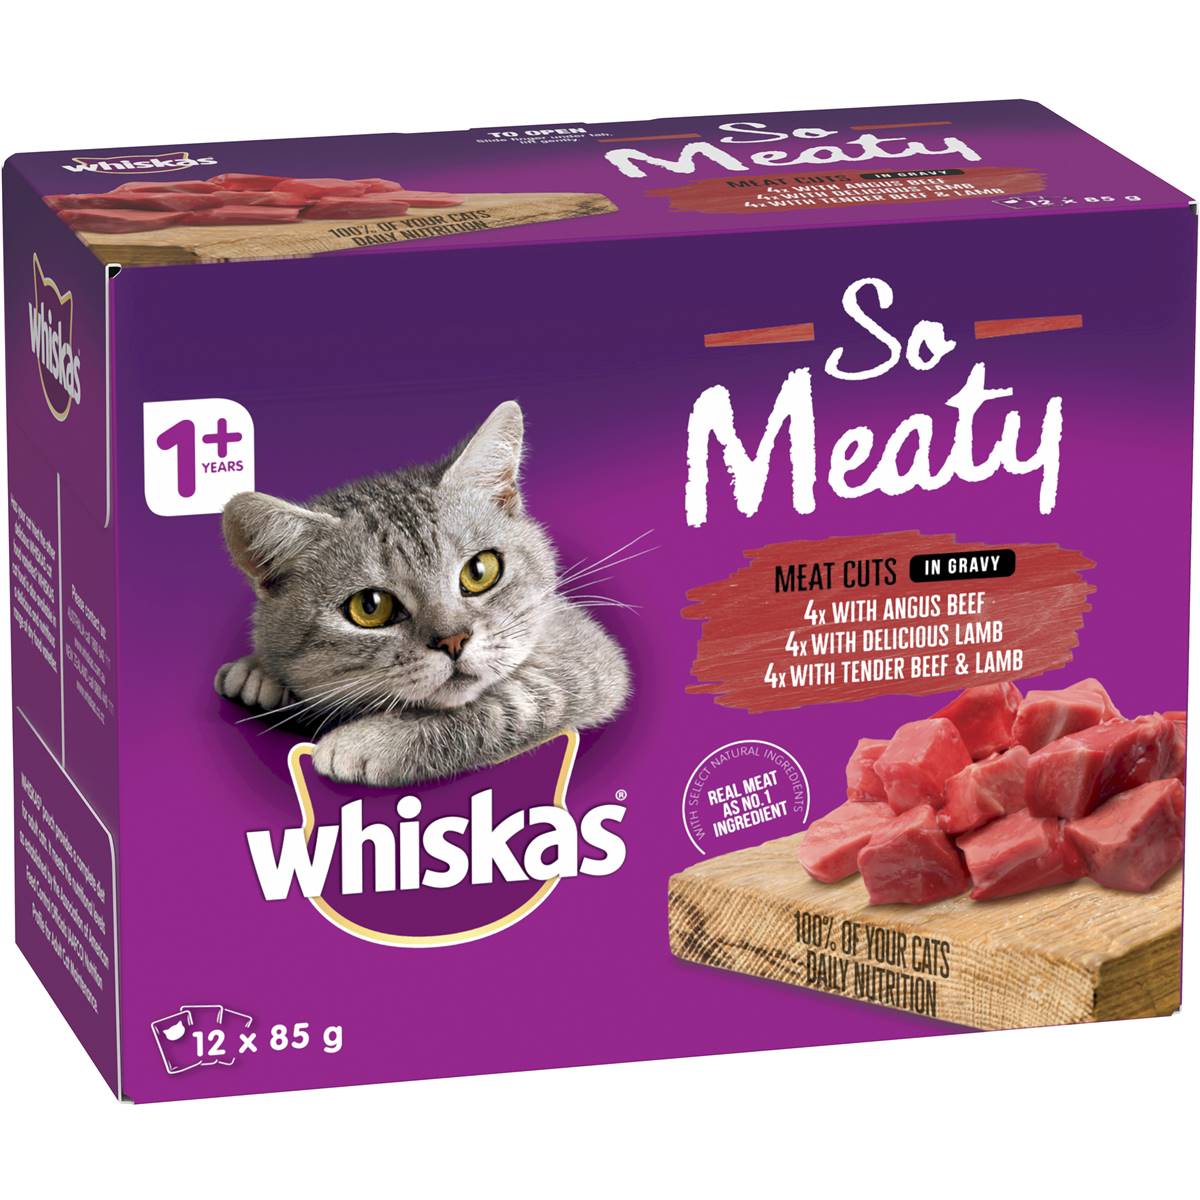 Whiskas Oh So Meaty Meat Cuts Adult Wet Cat Food 12x85g